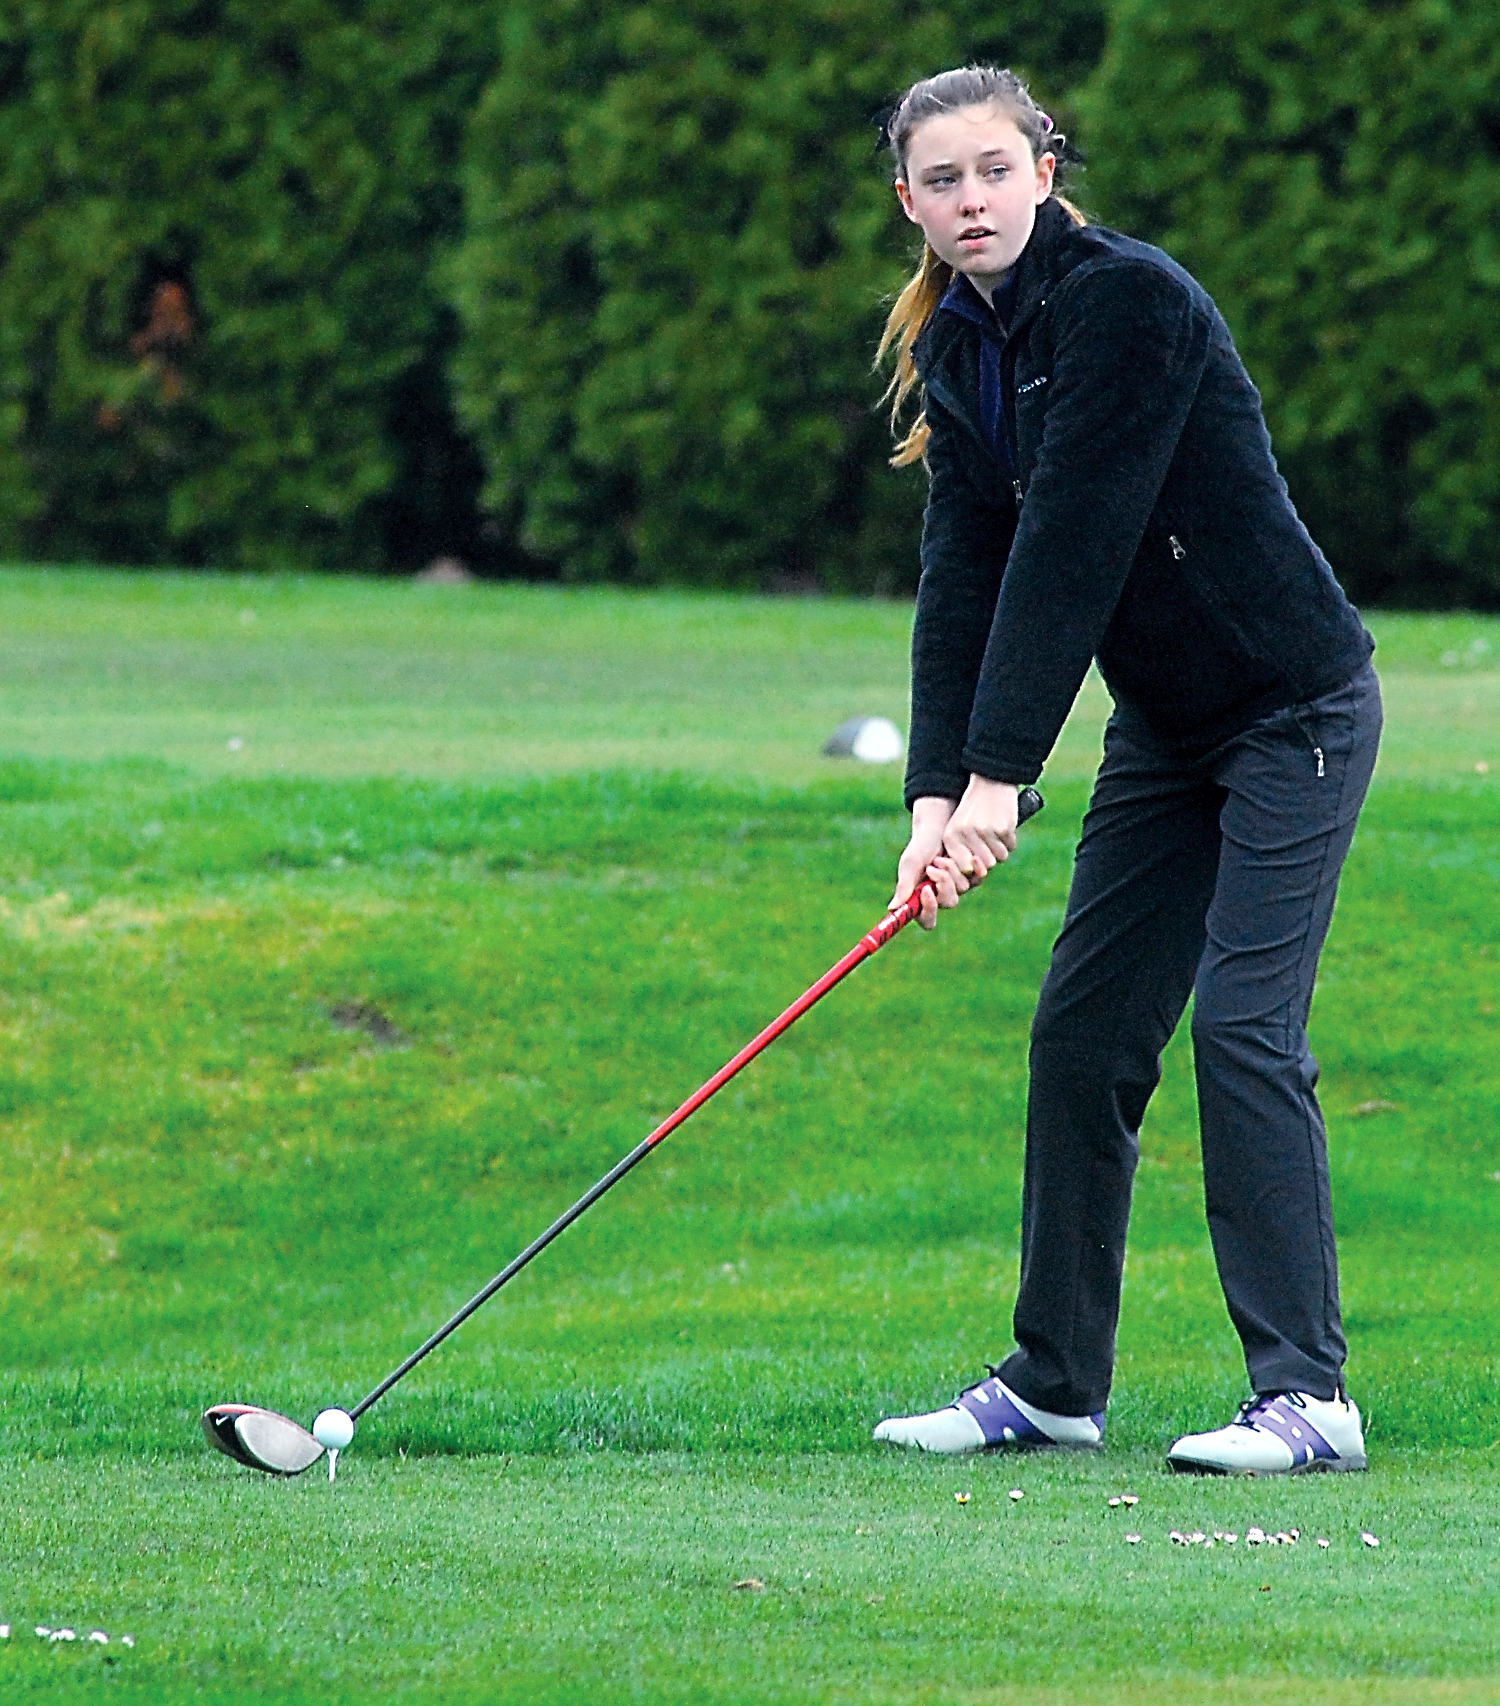 Sequim freshman Alex McMenamin sizes up her shot on the first hole at Cedars at Dungeness Golf Course against Port Angeles. Keith Thorpe/Peninsula Daily News